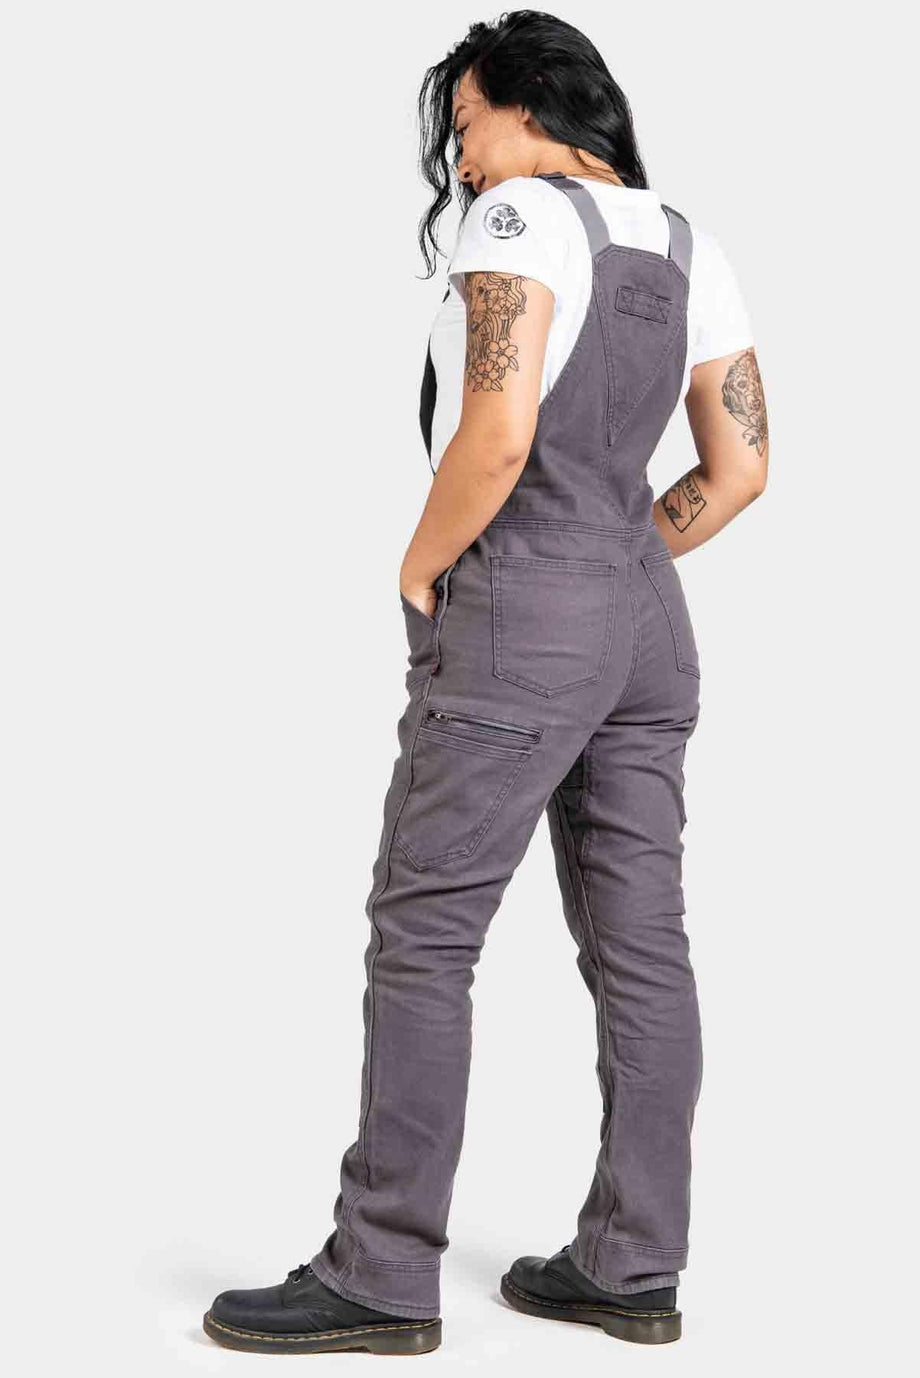 Freshley Overalls For Women in Grey Canvas | Dovetail Workwear